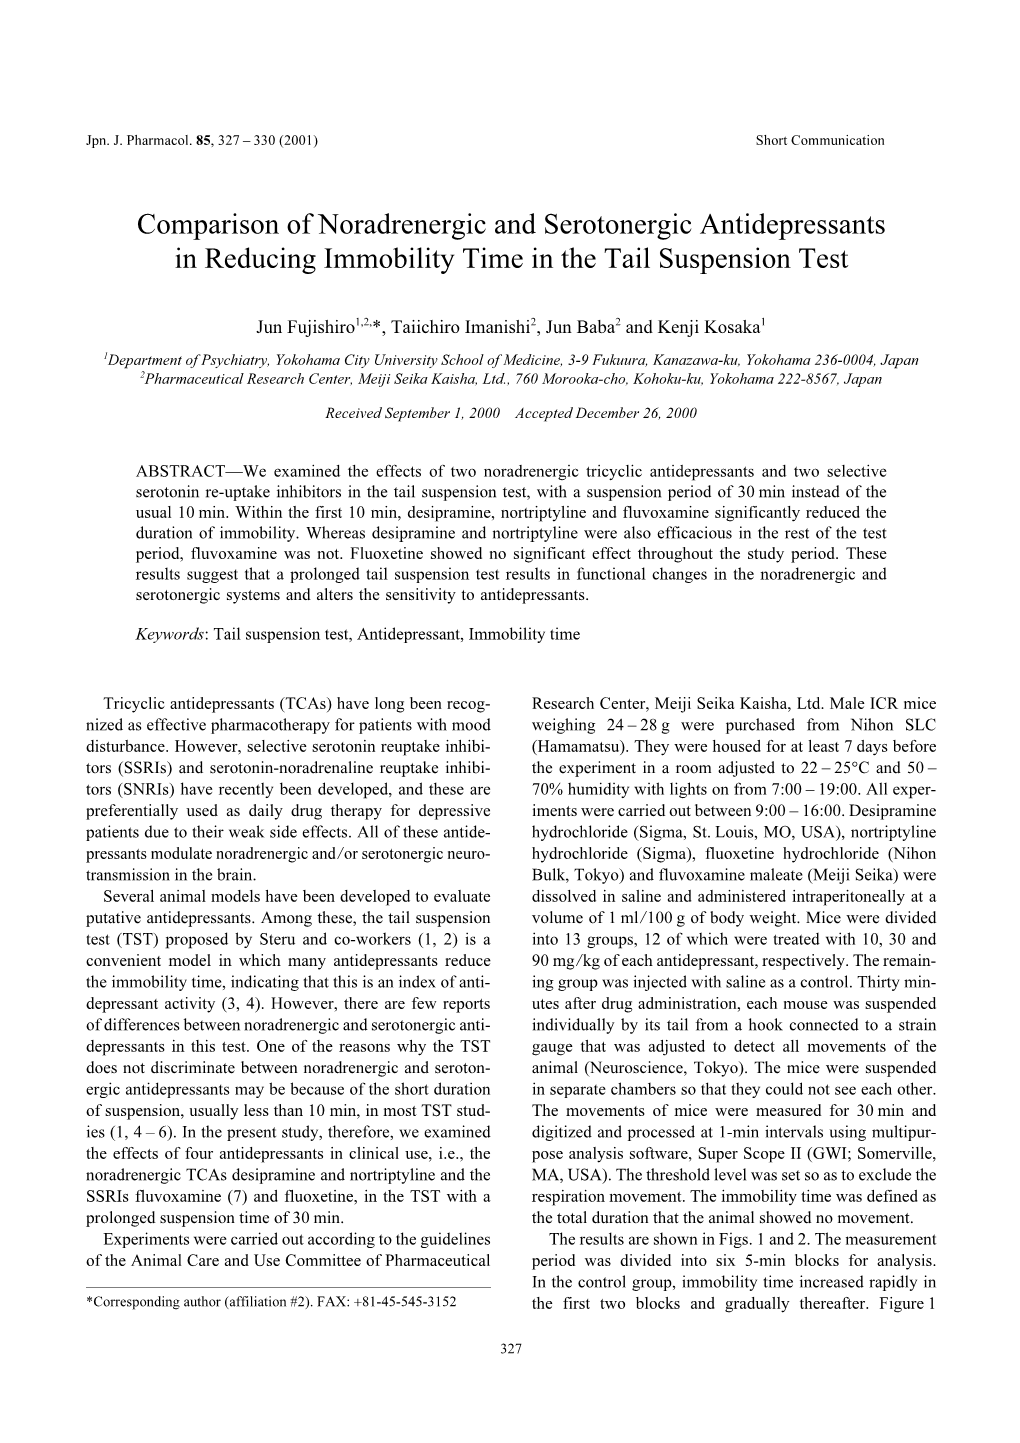 Comparison of Noradrenergic and Serotonergic Antidepressants in Reducing Immobility Time in the Tail Suspension Test